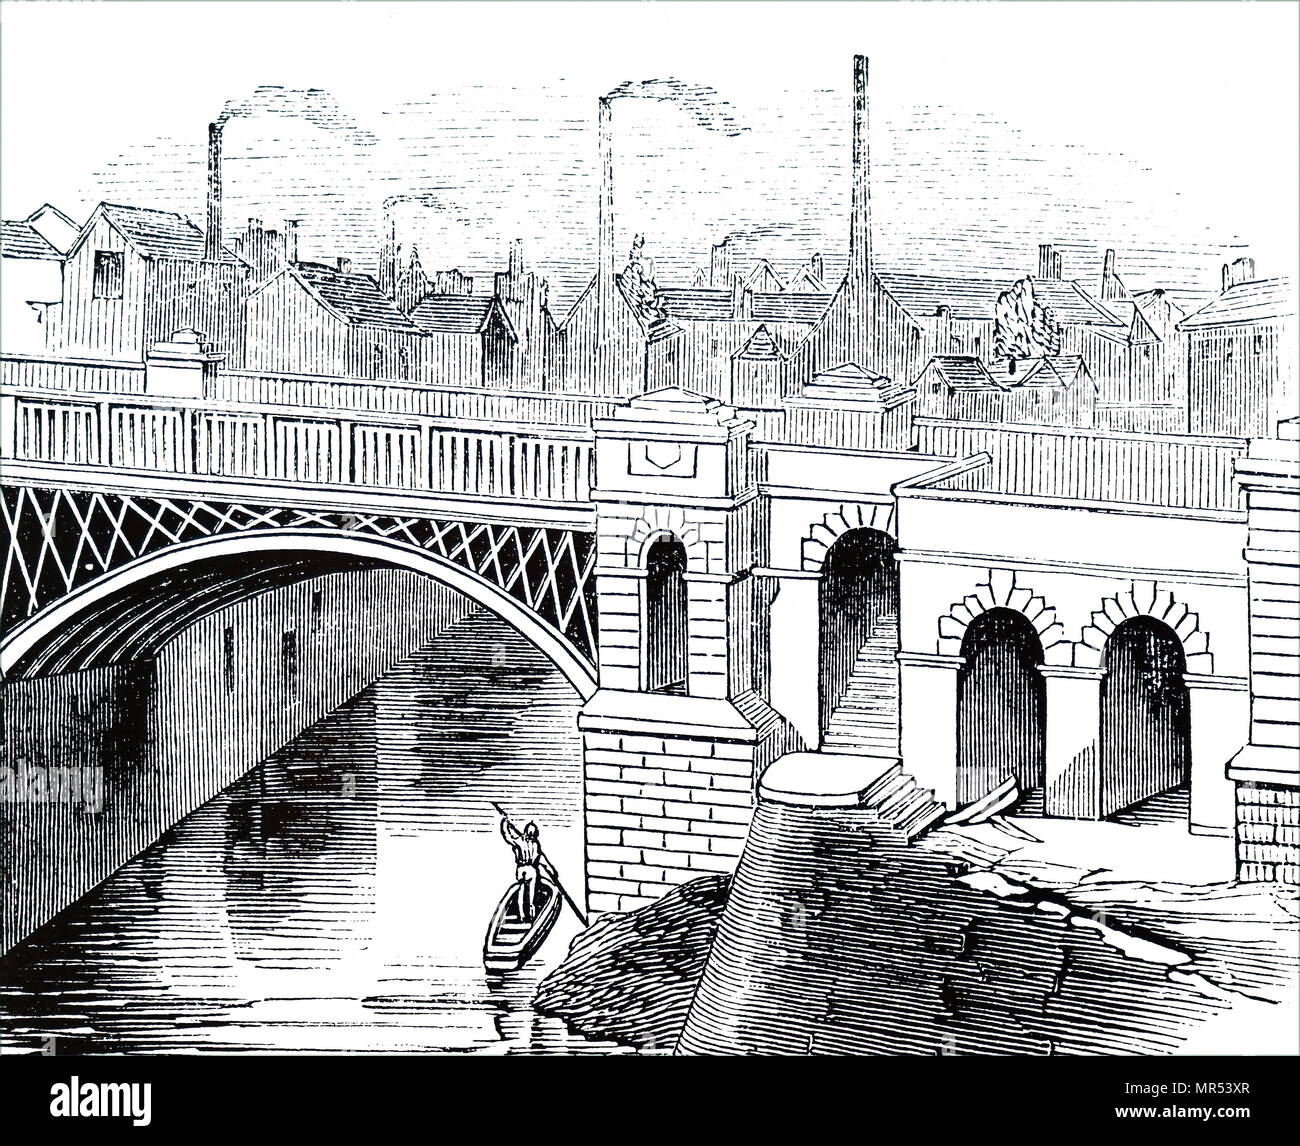 Engraving depicting the iron bridge over the Irwell River, which formed part of the Manchester and Leeds Railway. Dated 19th century Stock Photo